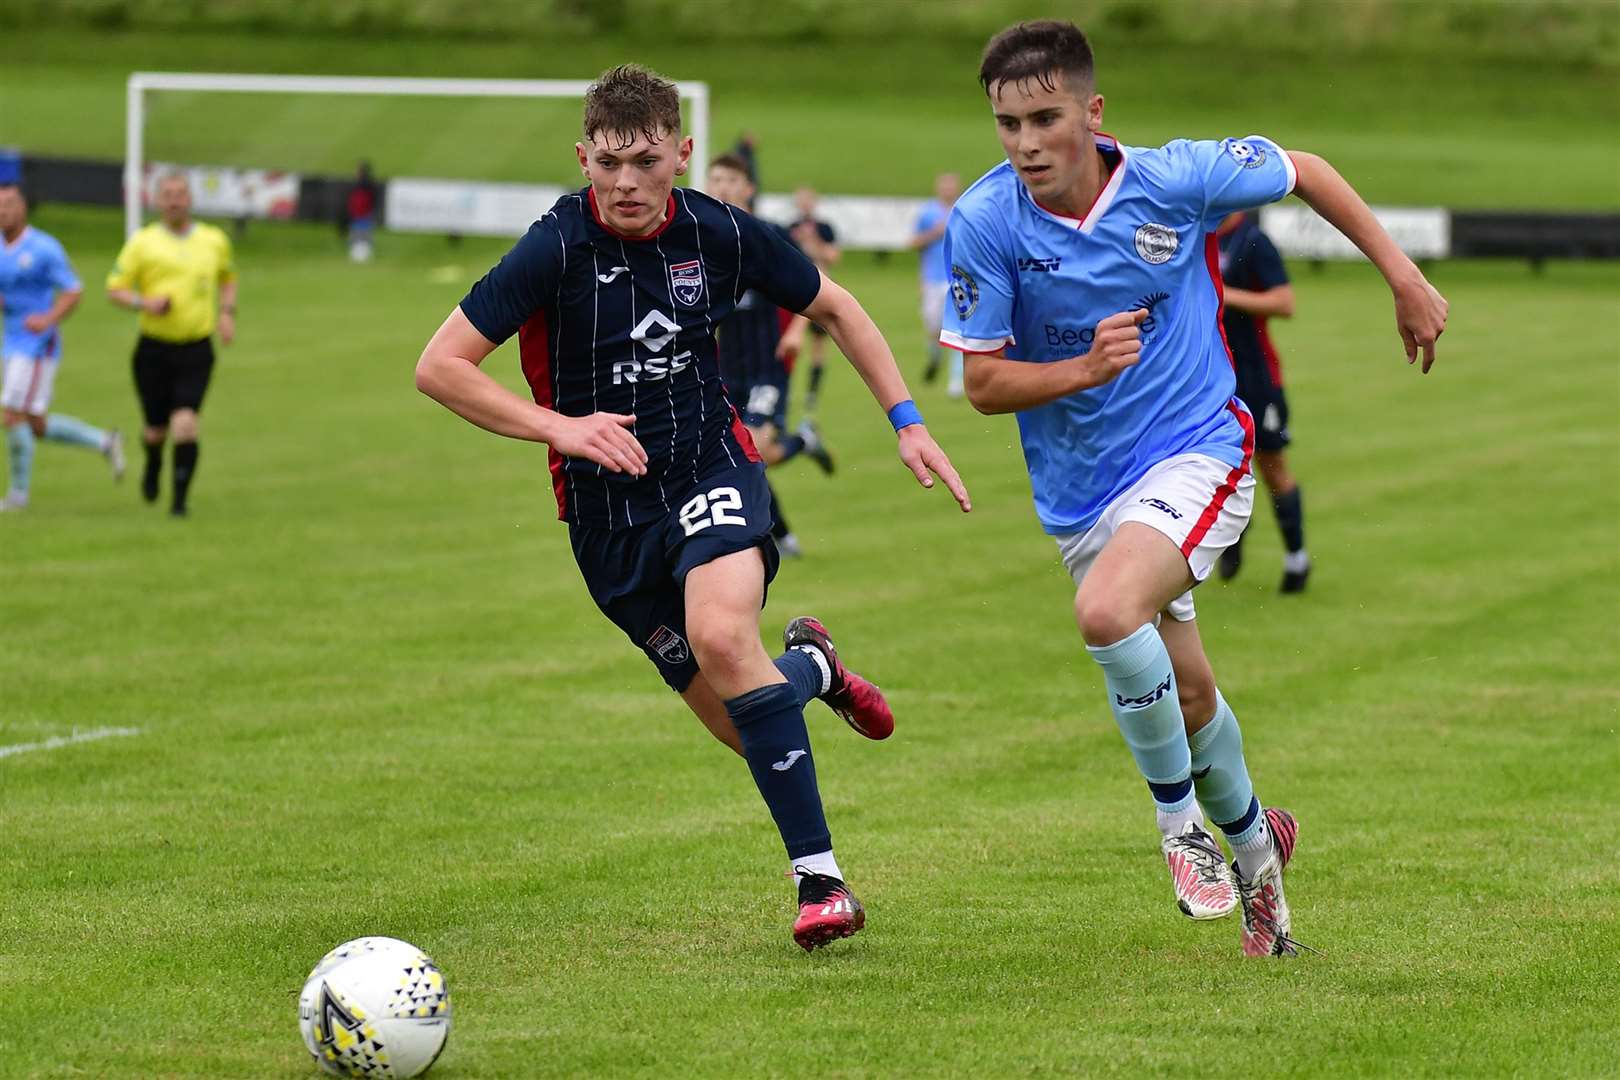 Matthew Robertson (Ross County) and Matthew Aitkenhead (Wick Academy) in a race for the ball during a pre-season friendly between the two teams in July. Picture: Mel Roger